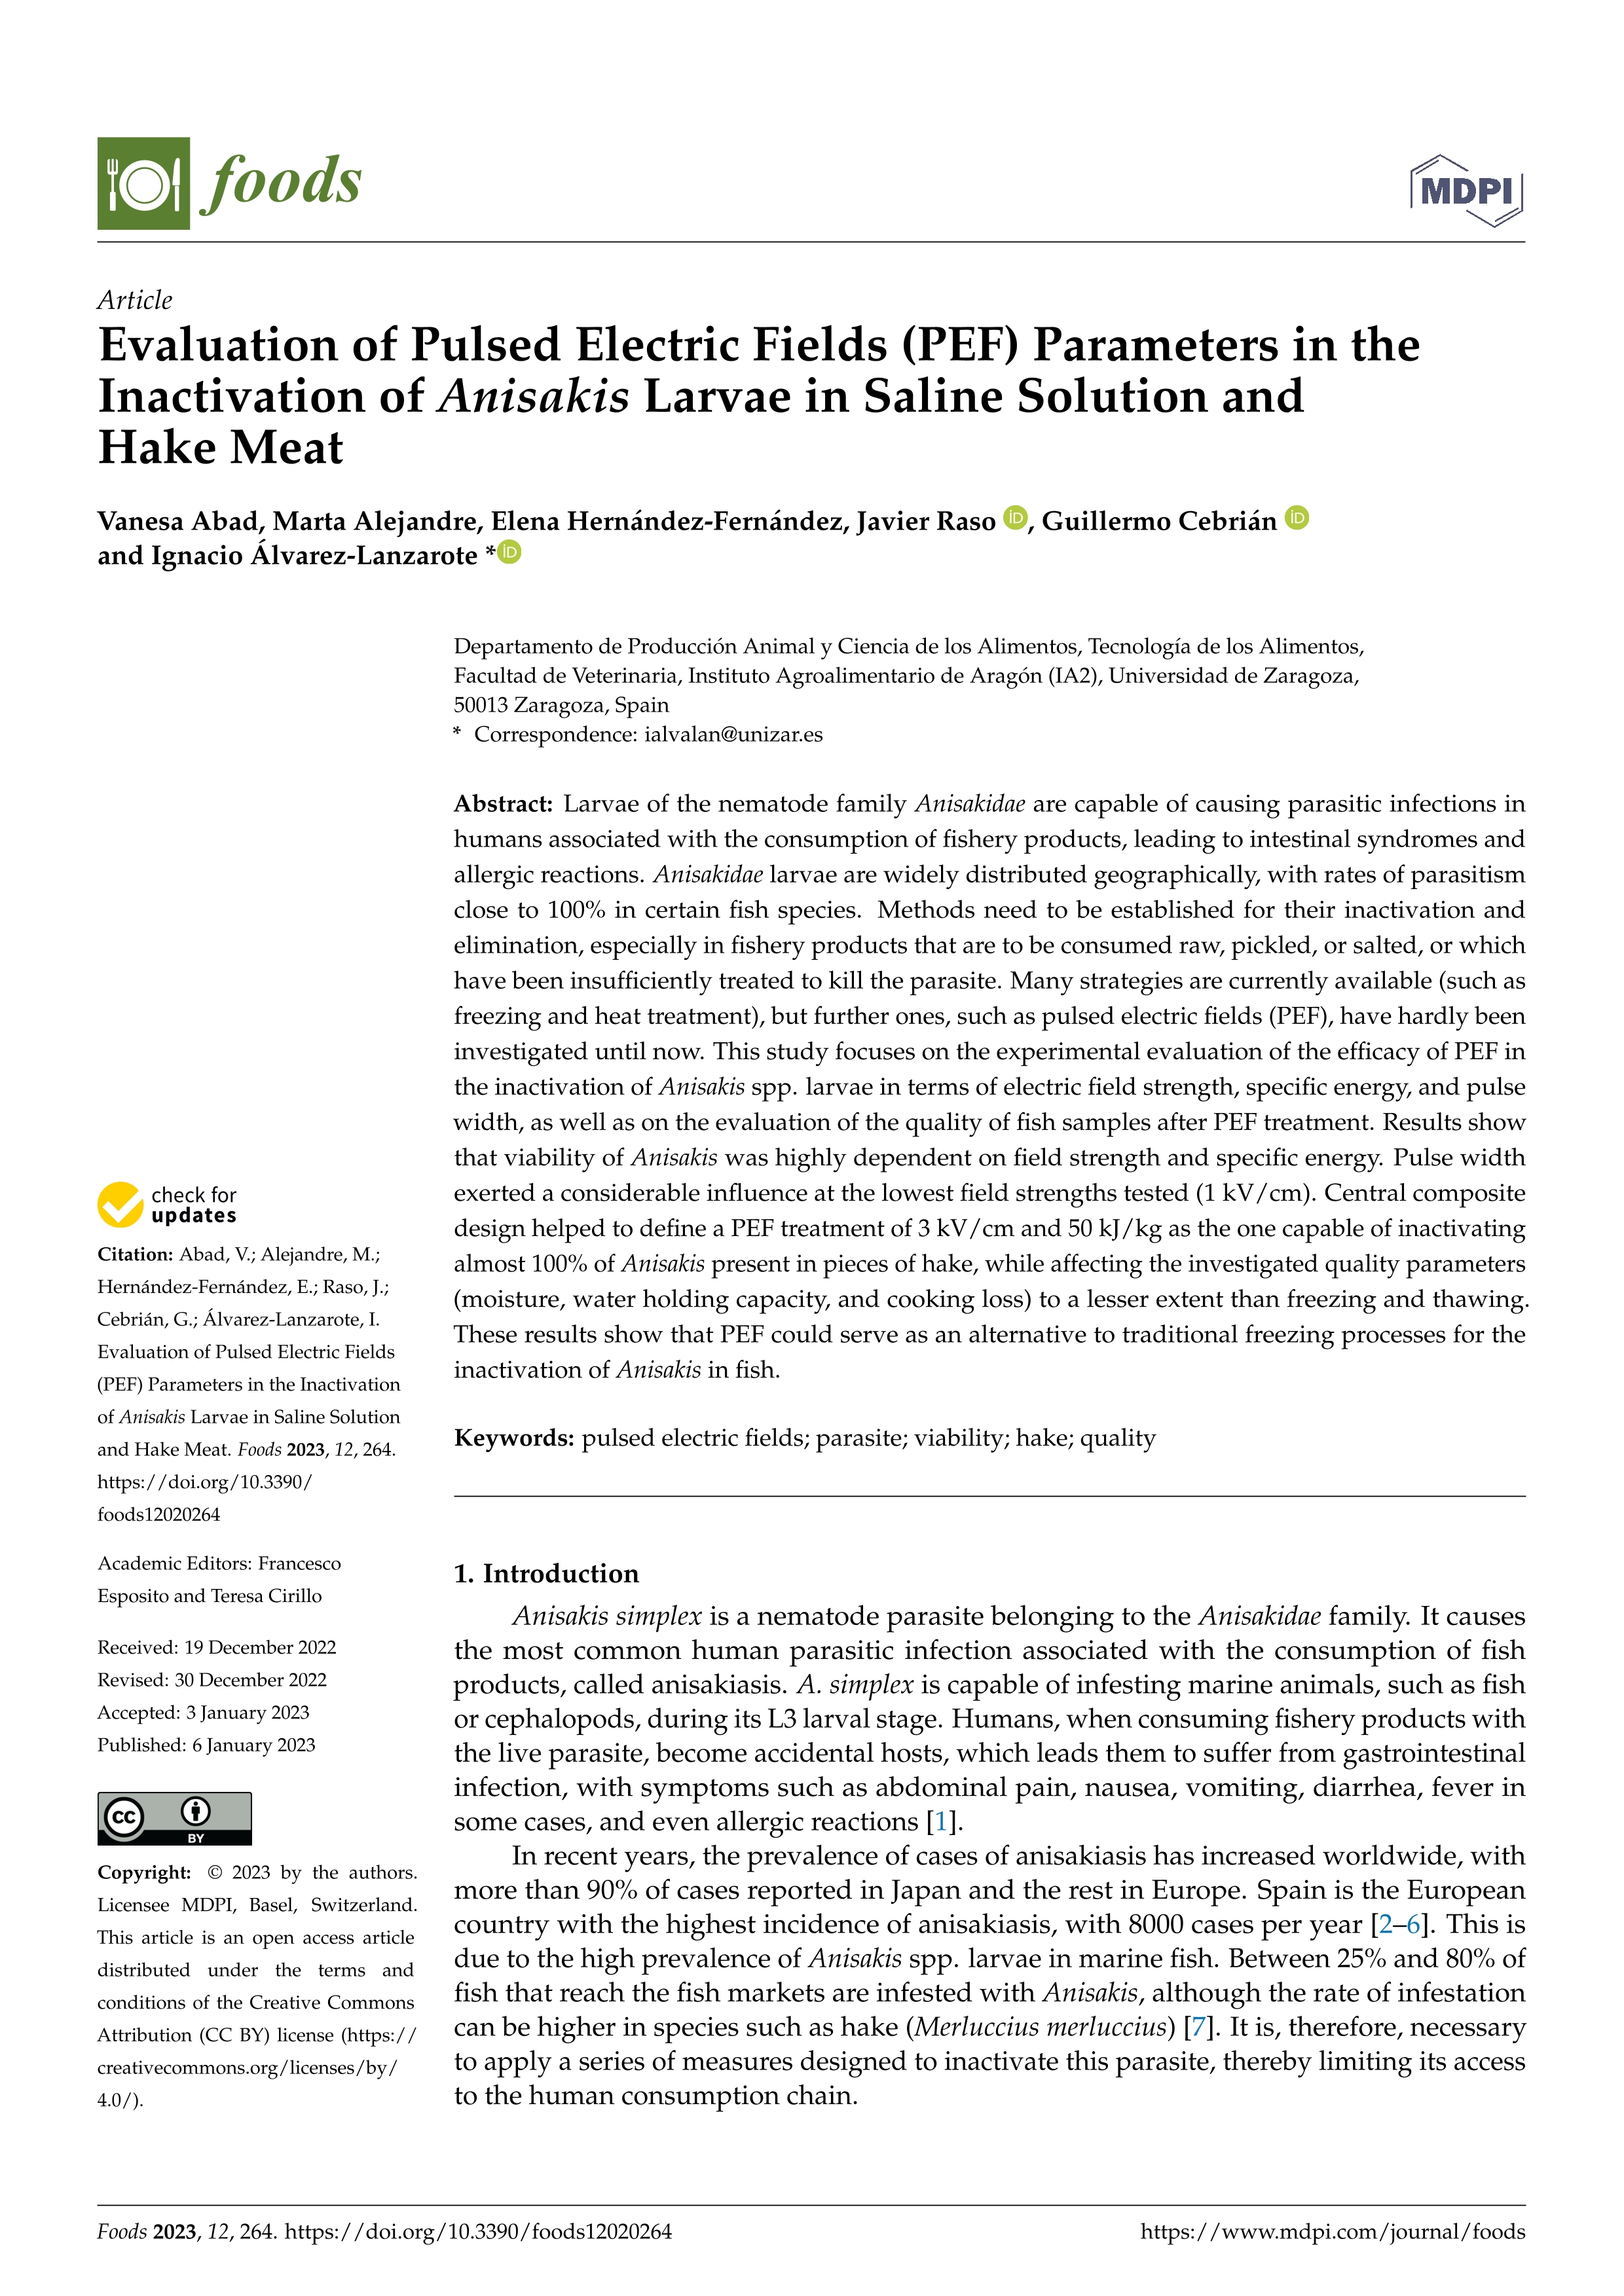 Evaluation of Pulsed Electric Fields (PEF) Parameters in the Inactivation of Anisakis Larvae in Saline Solution and Hake Meat